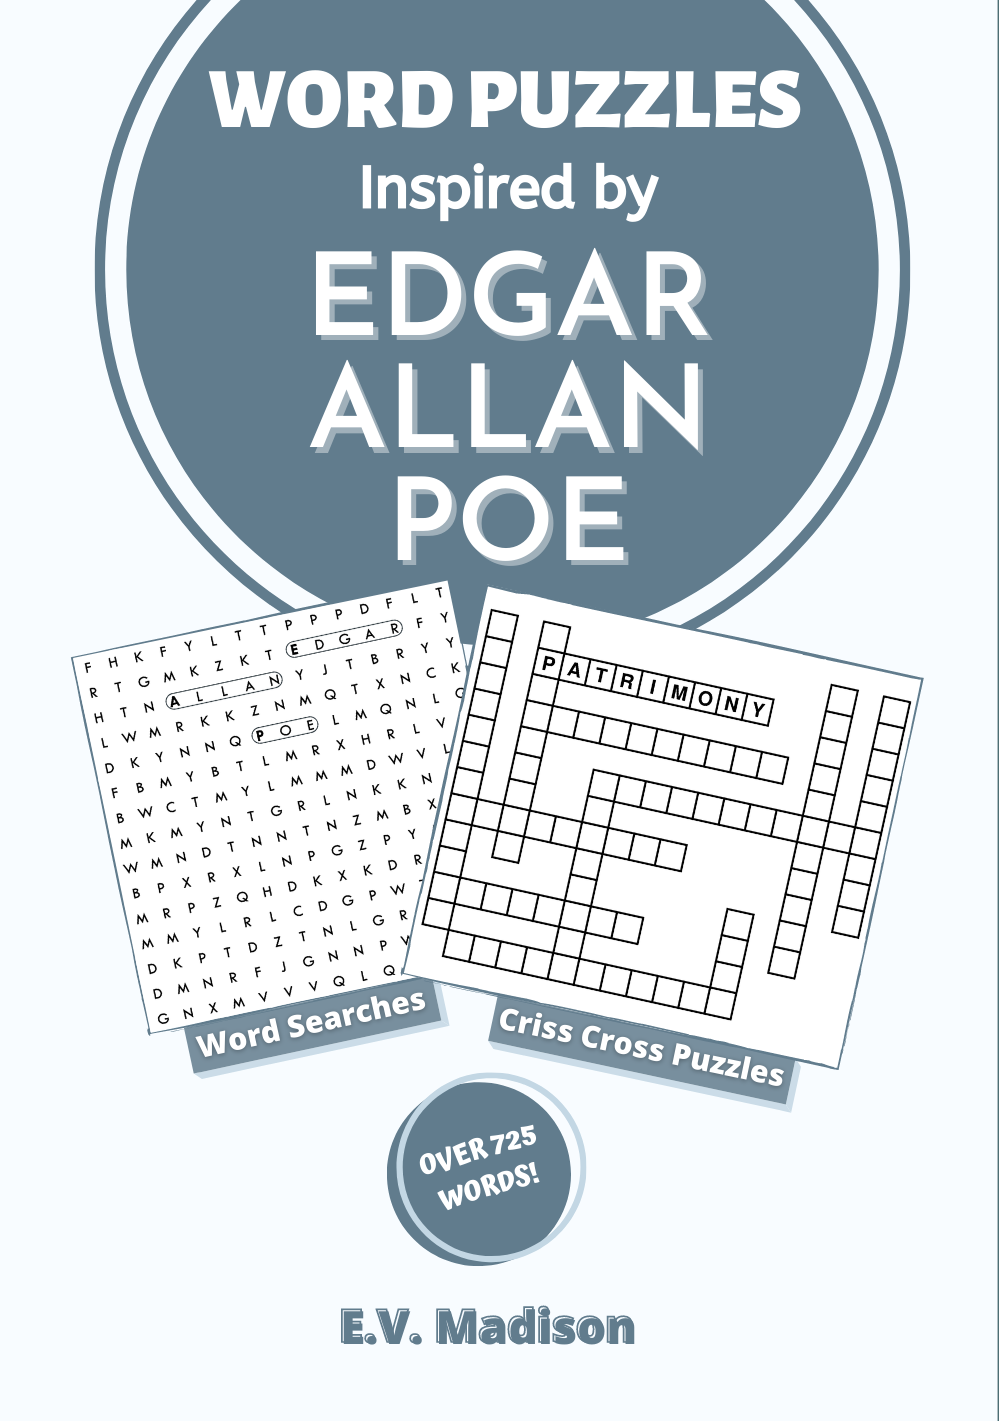 Word Puzzles Inspired by Edgar Allan Poe